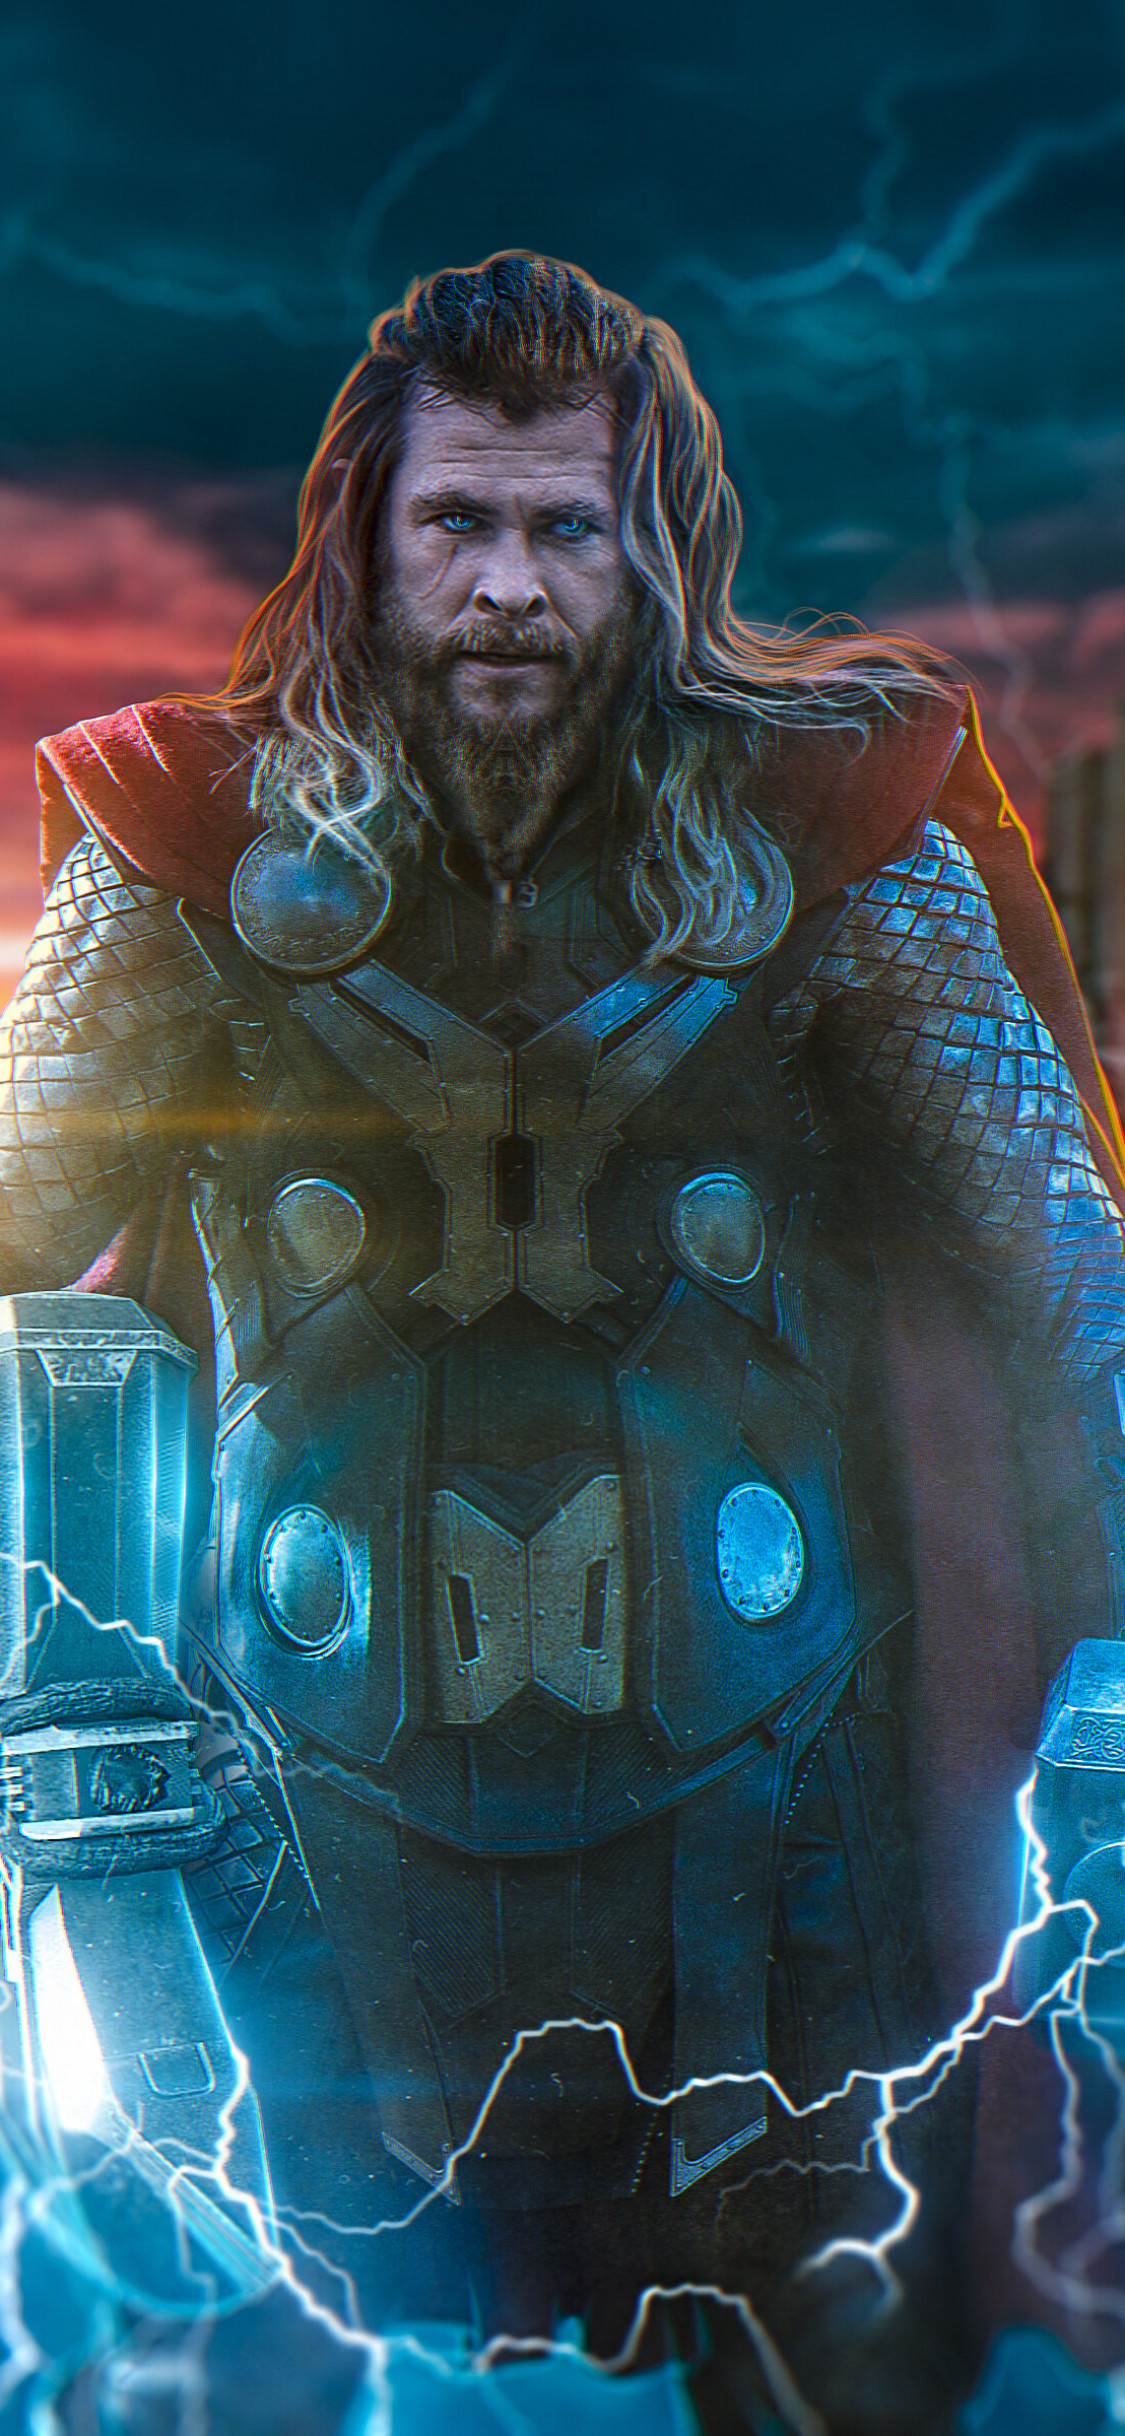 Thor In Avengers Endgame New iPhone XS, iPhone 10